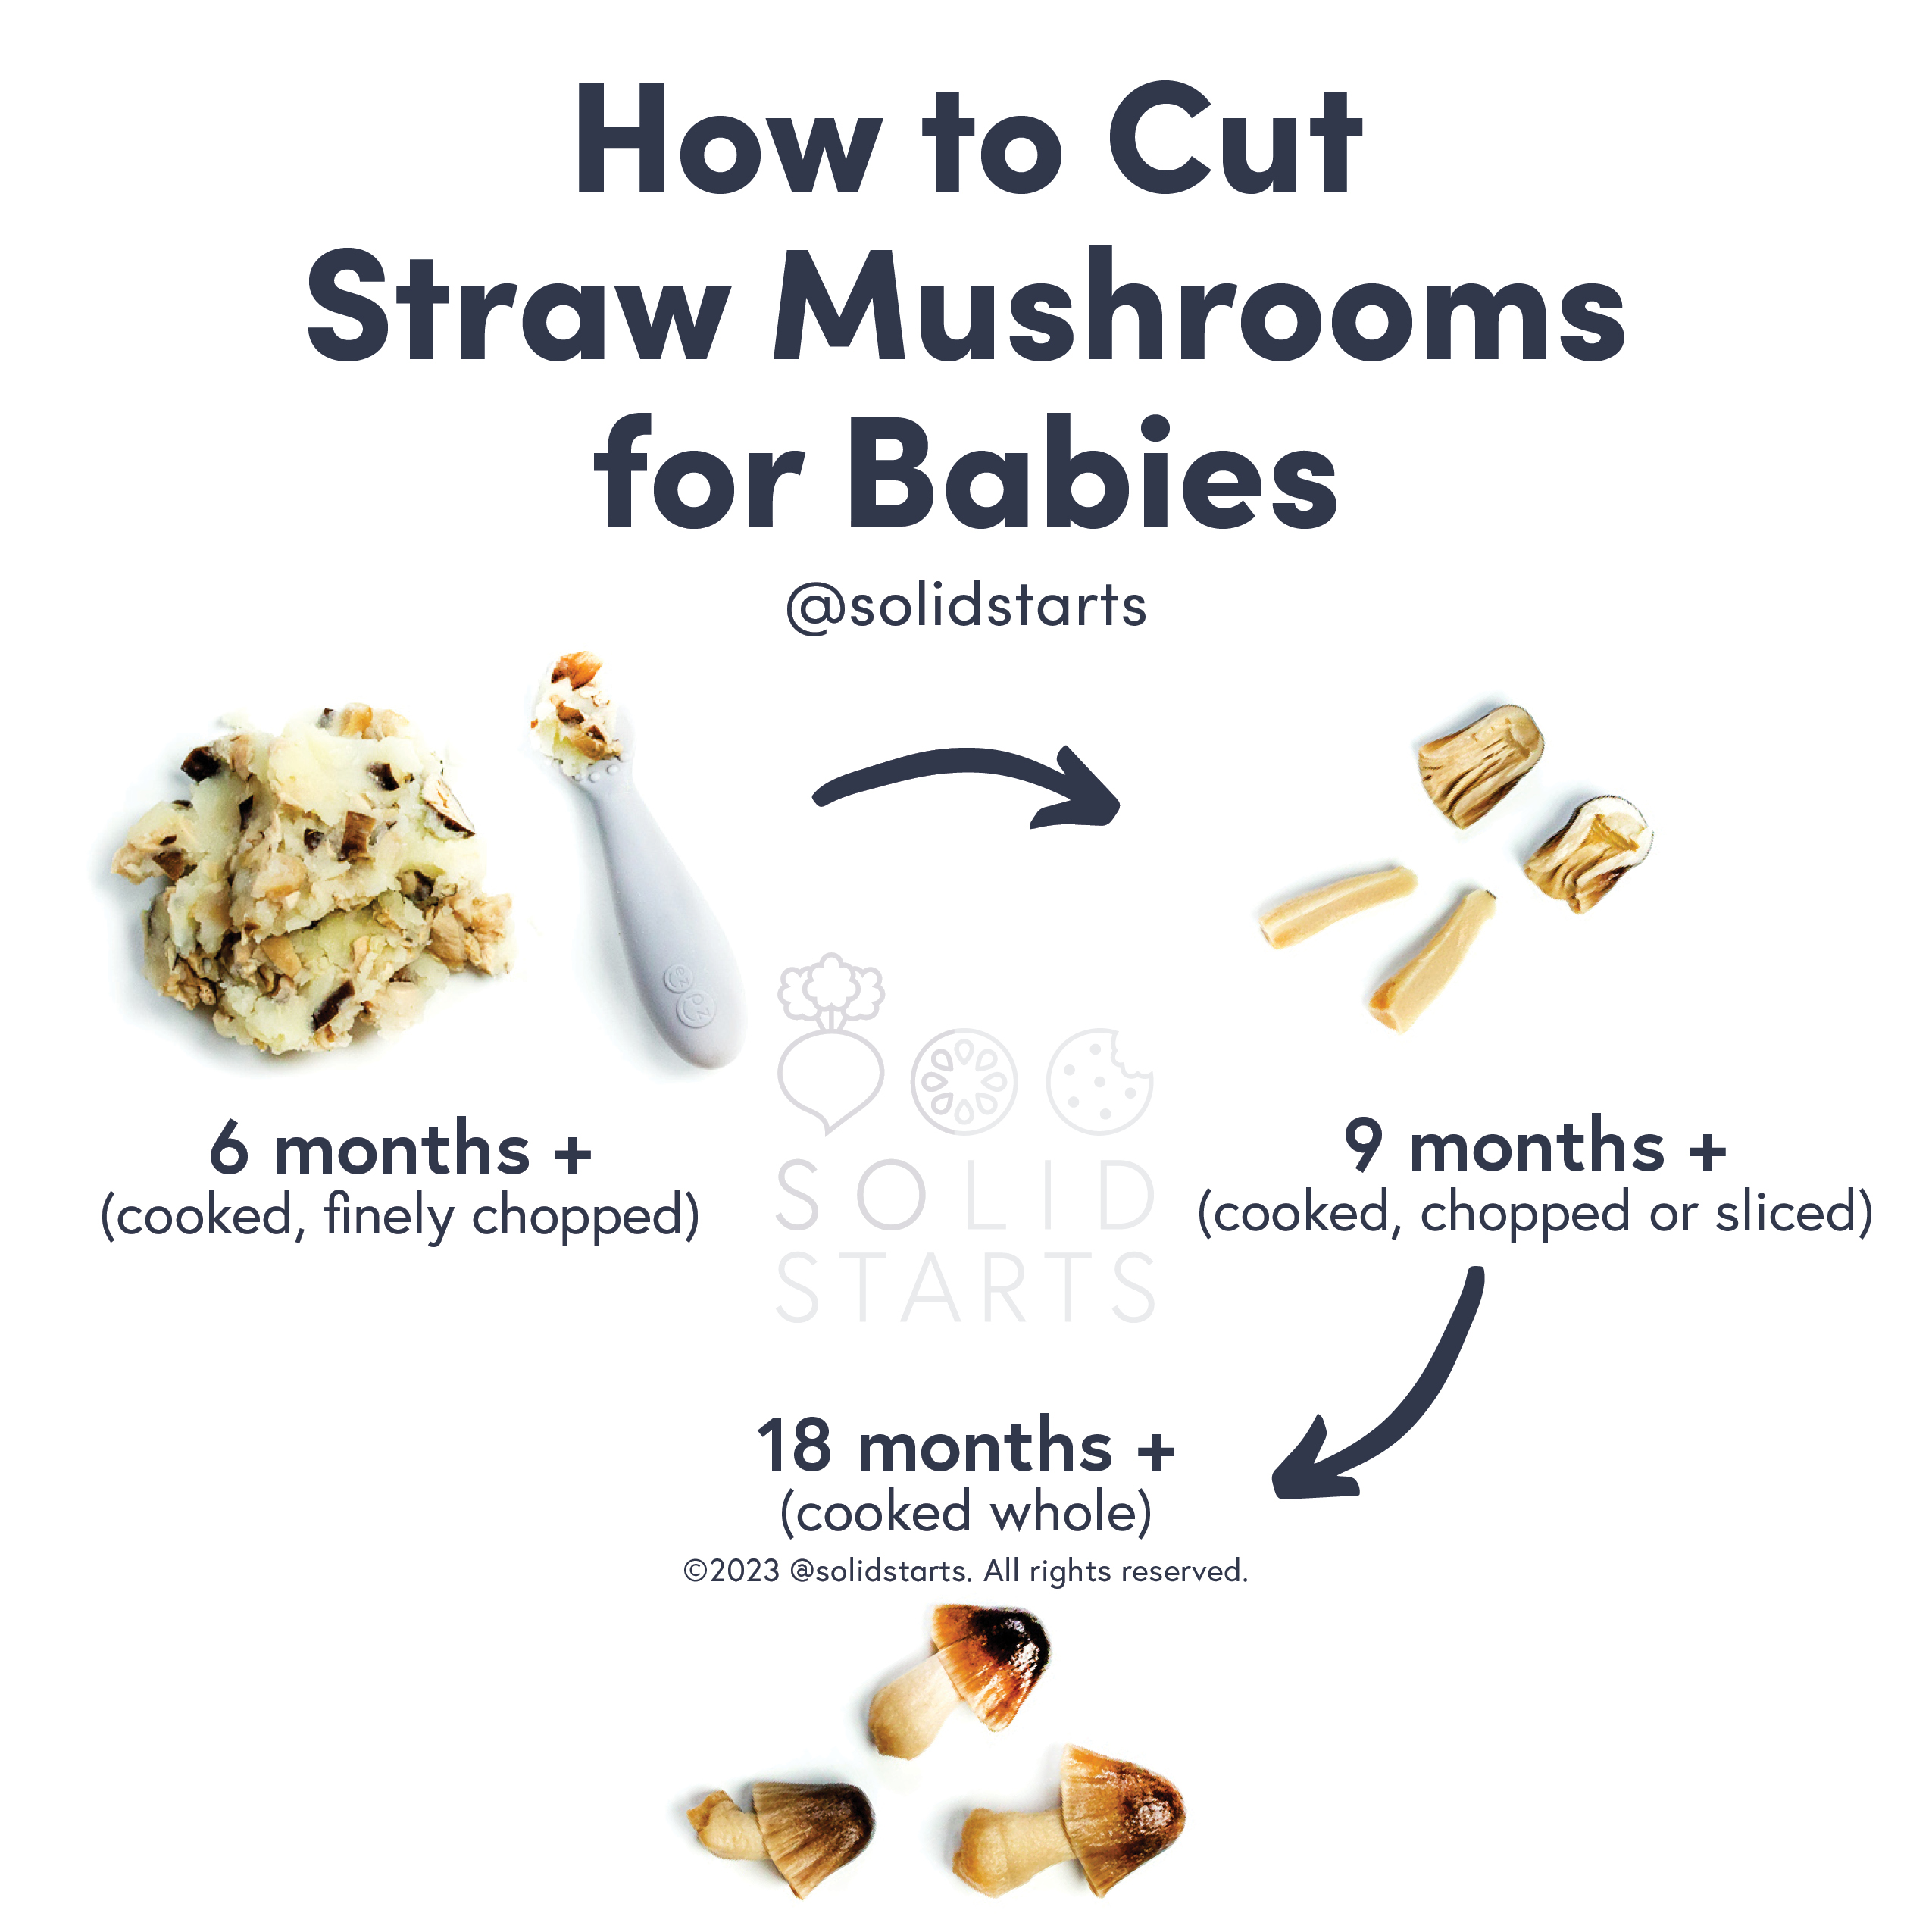 Straw Mushroom for Babies - When Can Babies Eat Straw Mushrooms